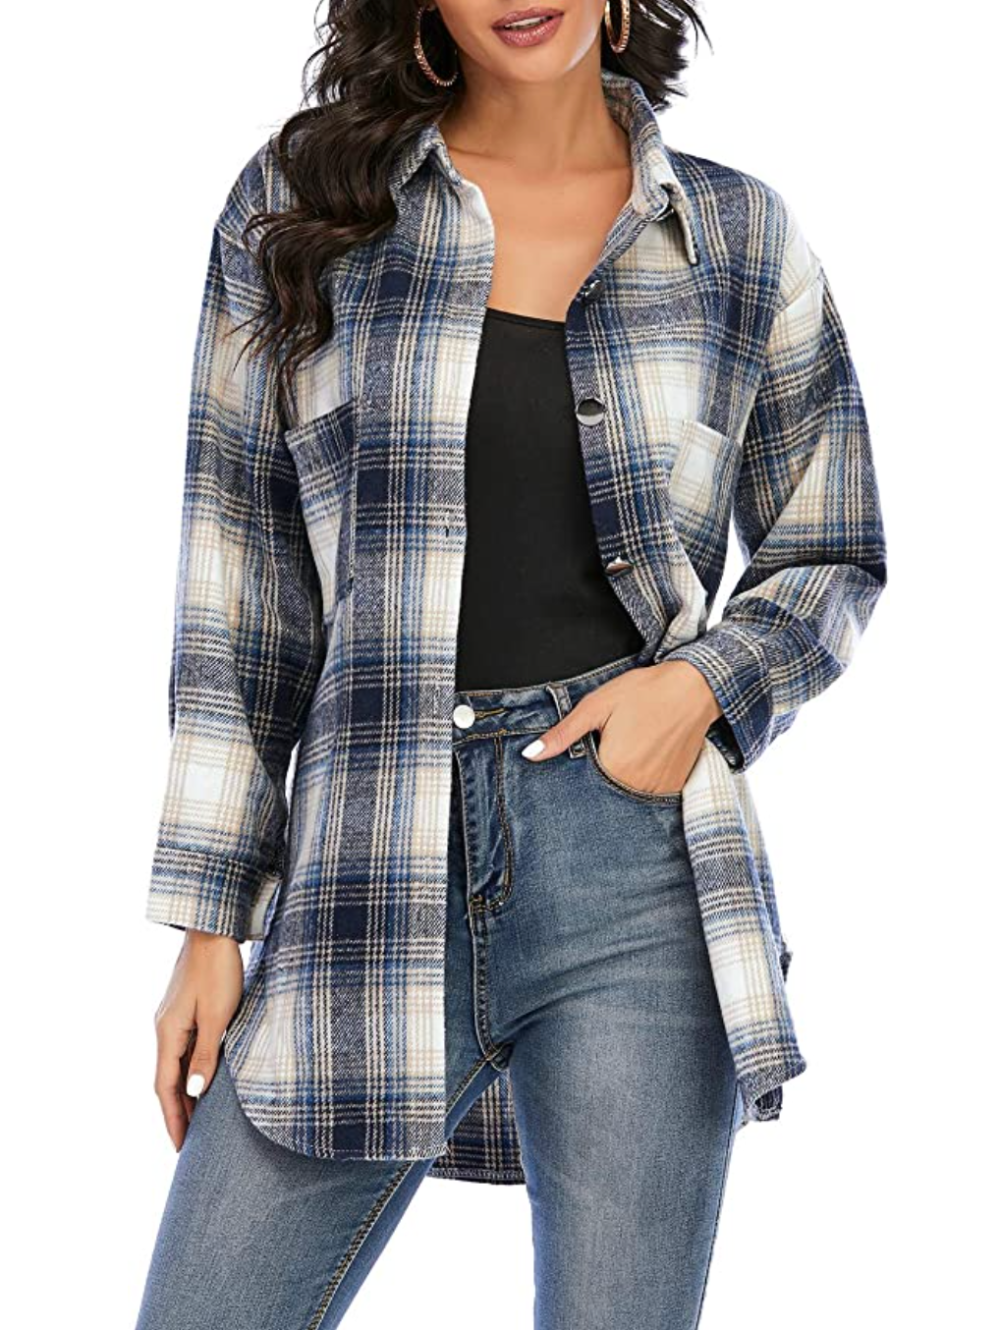 Meceku Women's Flannel Plaid Casual Button-Down Shirts with Pockets